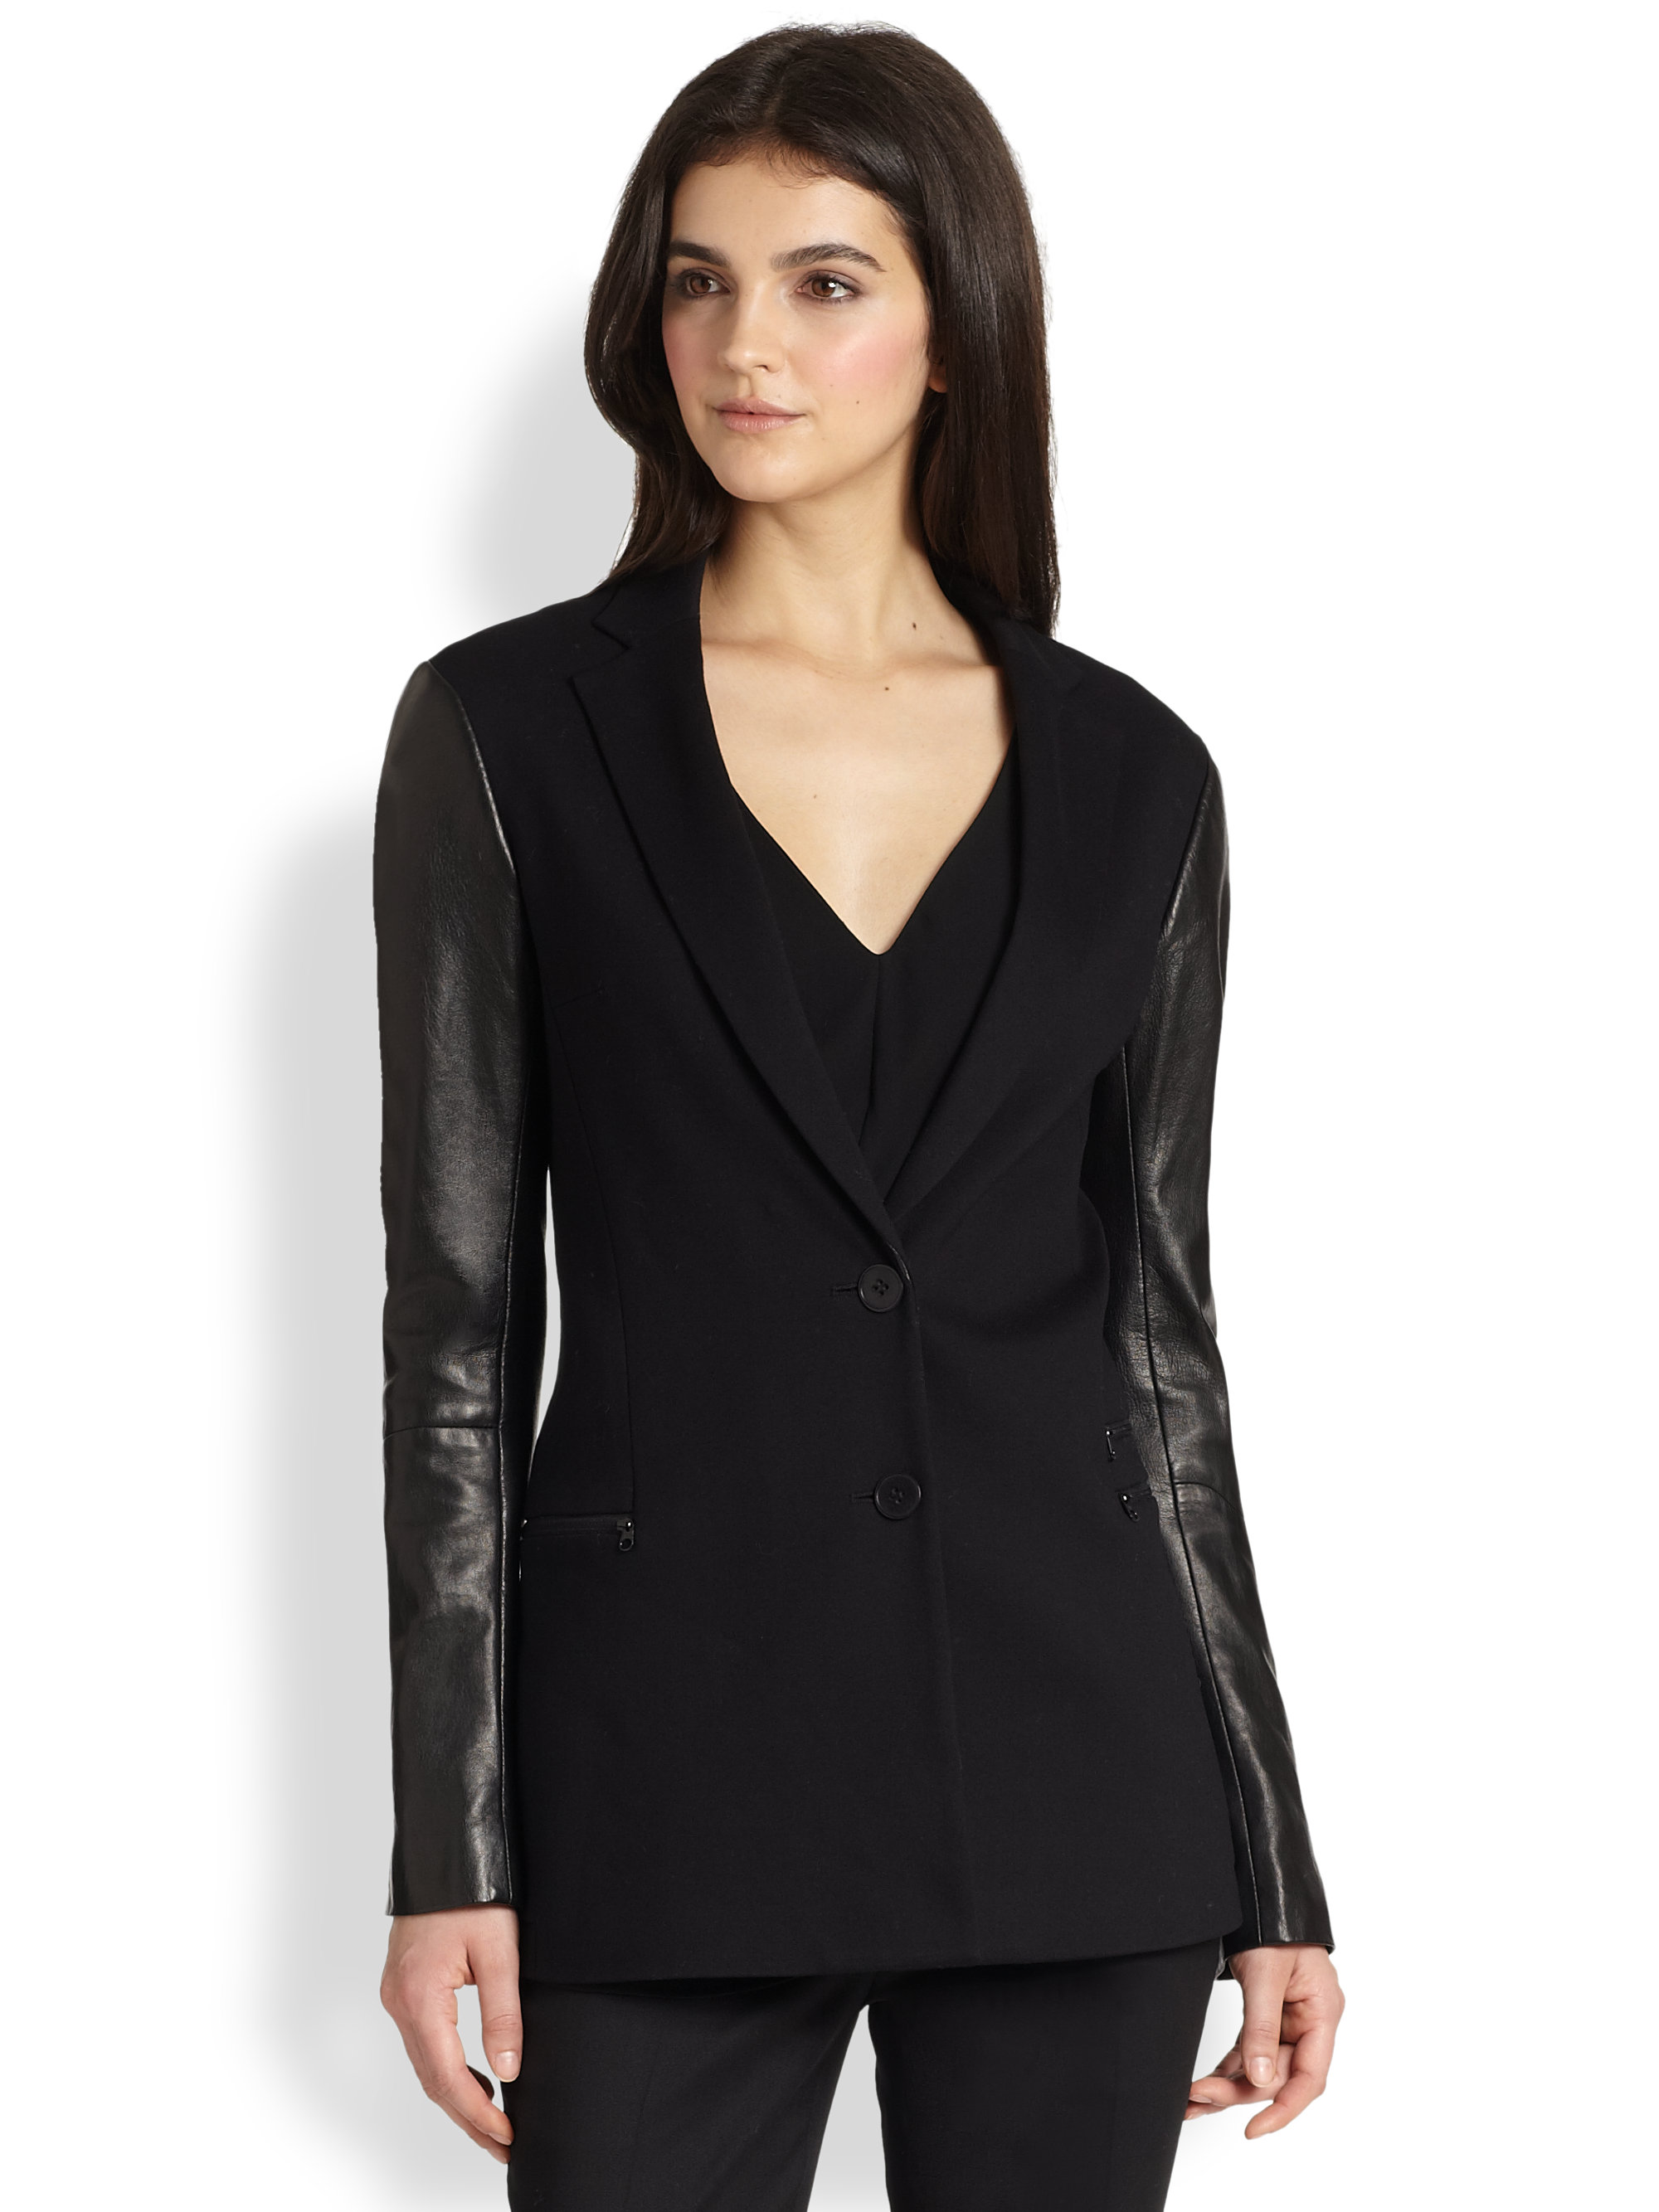 Lyst - Theory Lavey Pryor Leather-Sleeved Blazer in Black